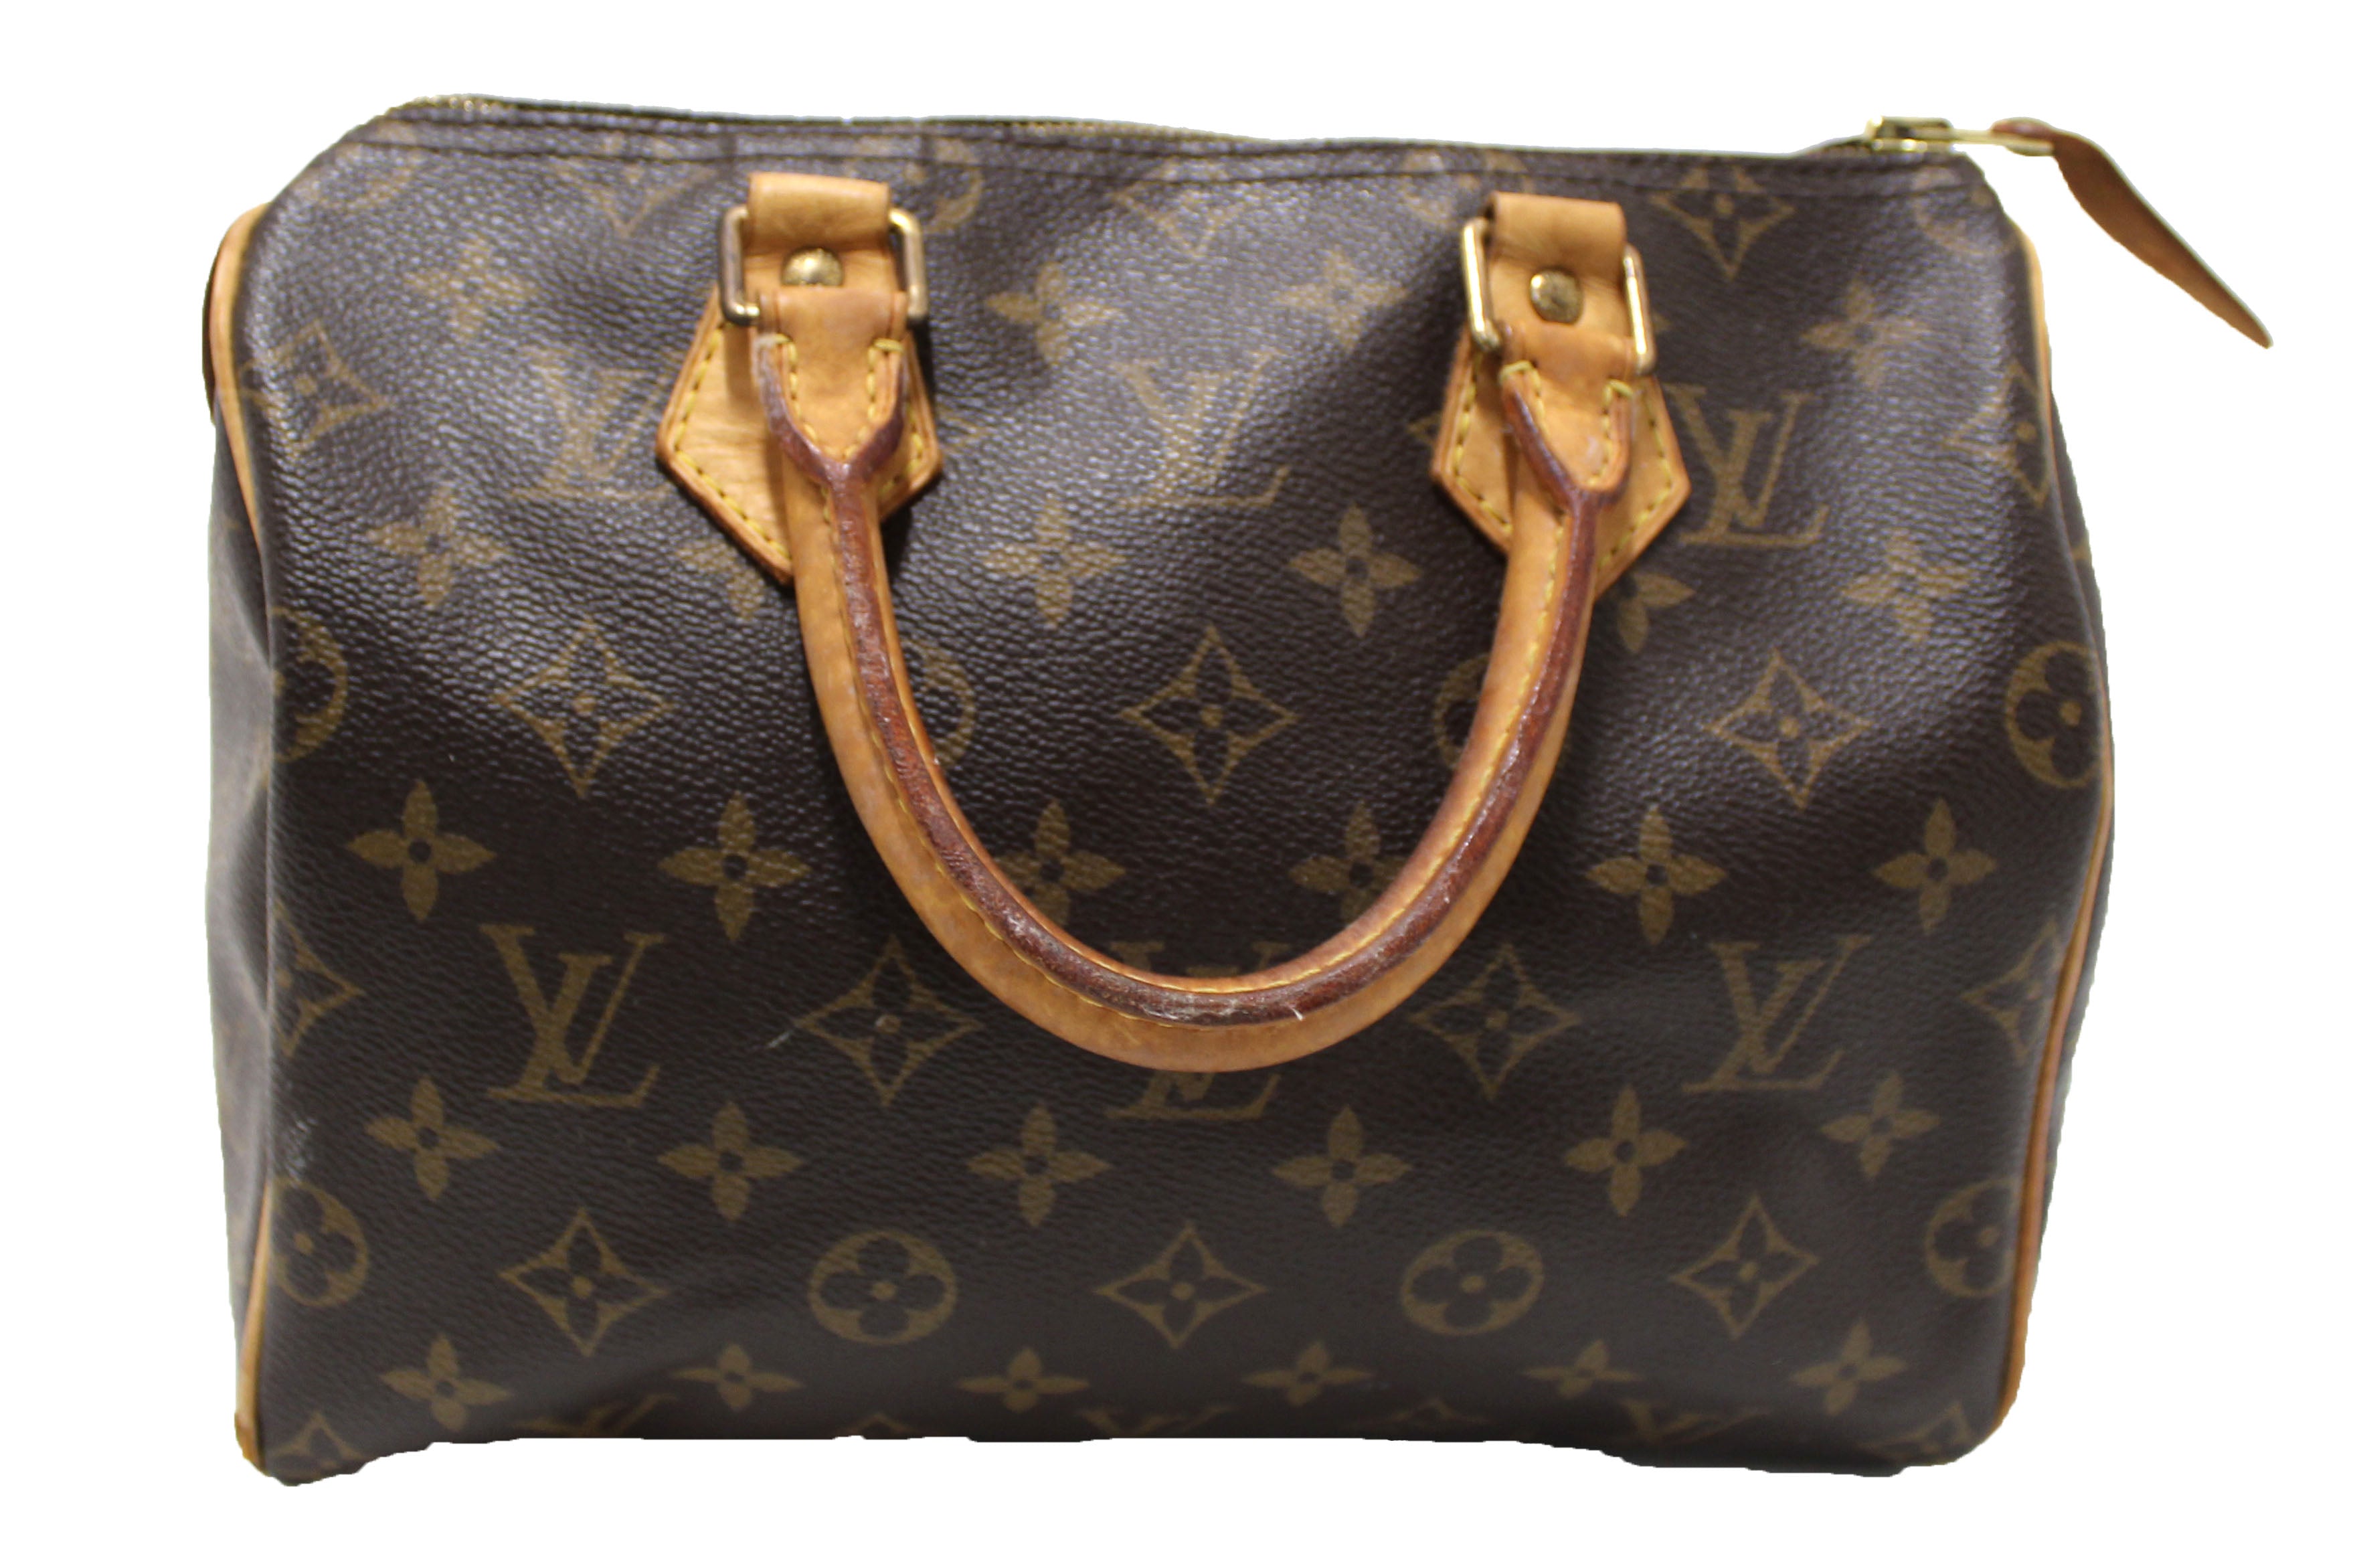 Authentic Louis Vuitton Speedy 25 Bag in Great Shape - clothing